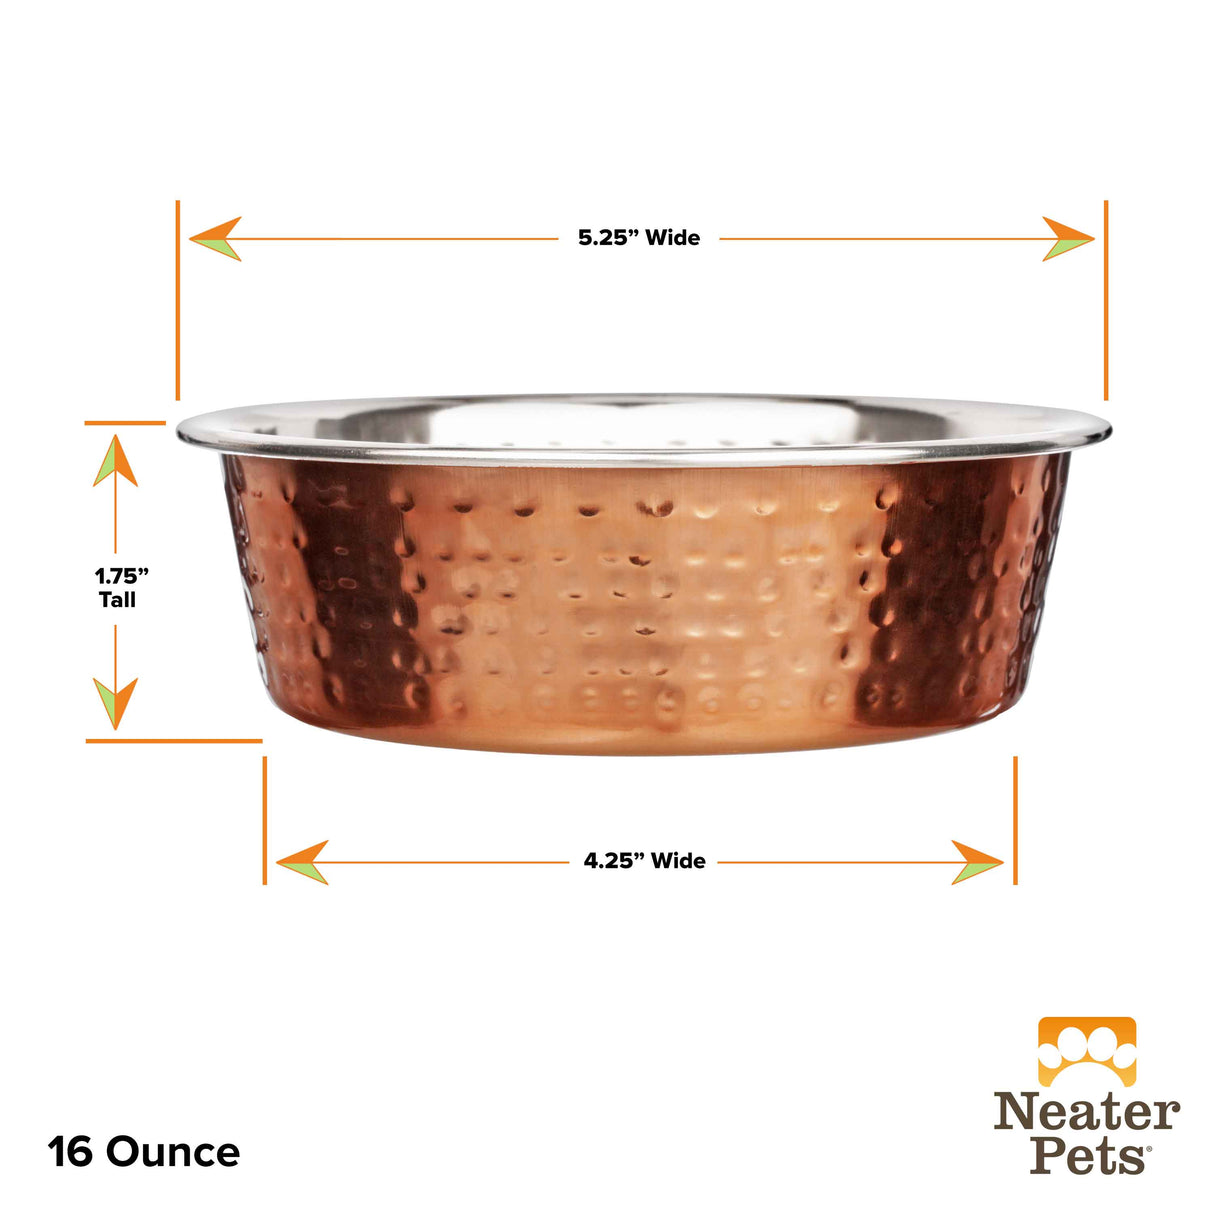 Dimensions of the 16 ounce Hammered Copper Finish Bowl